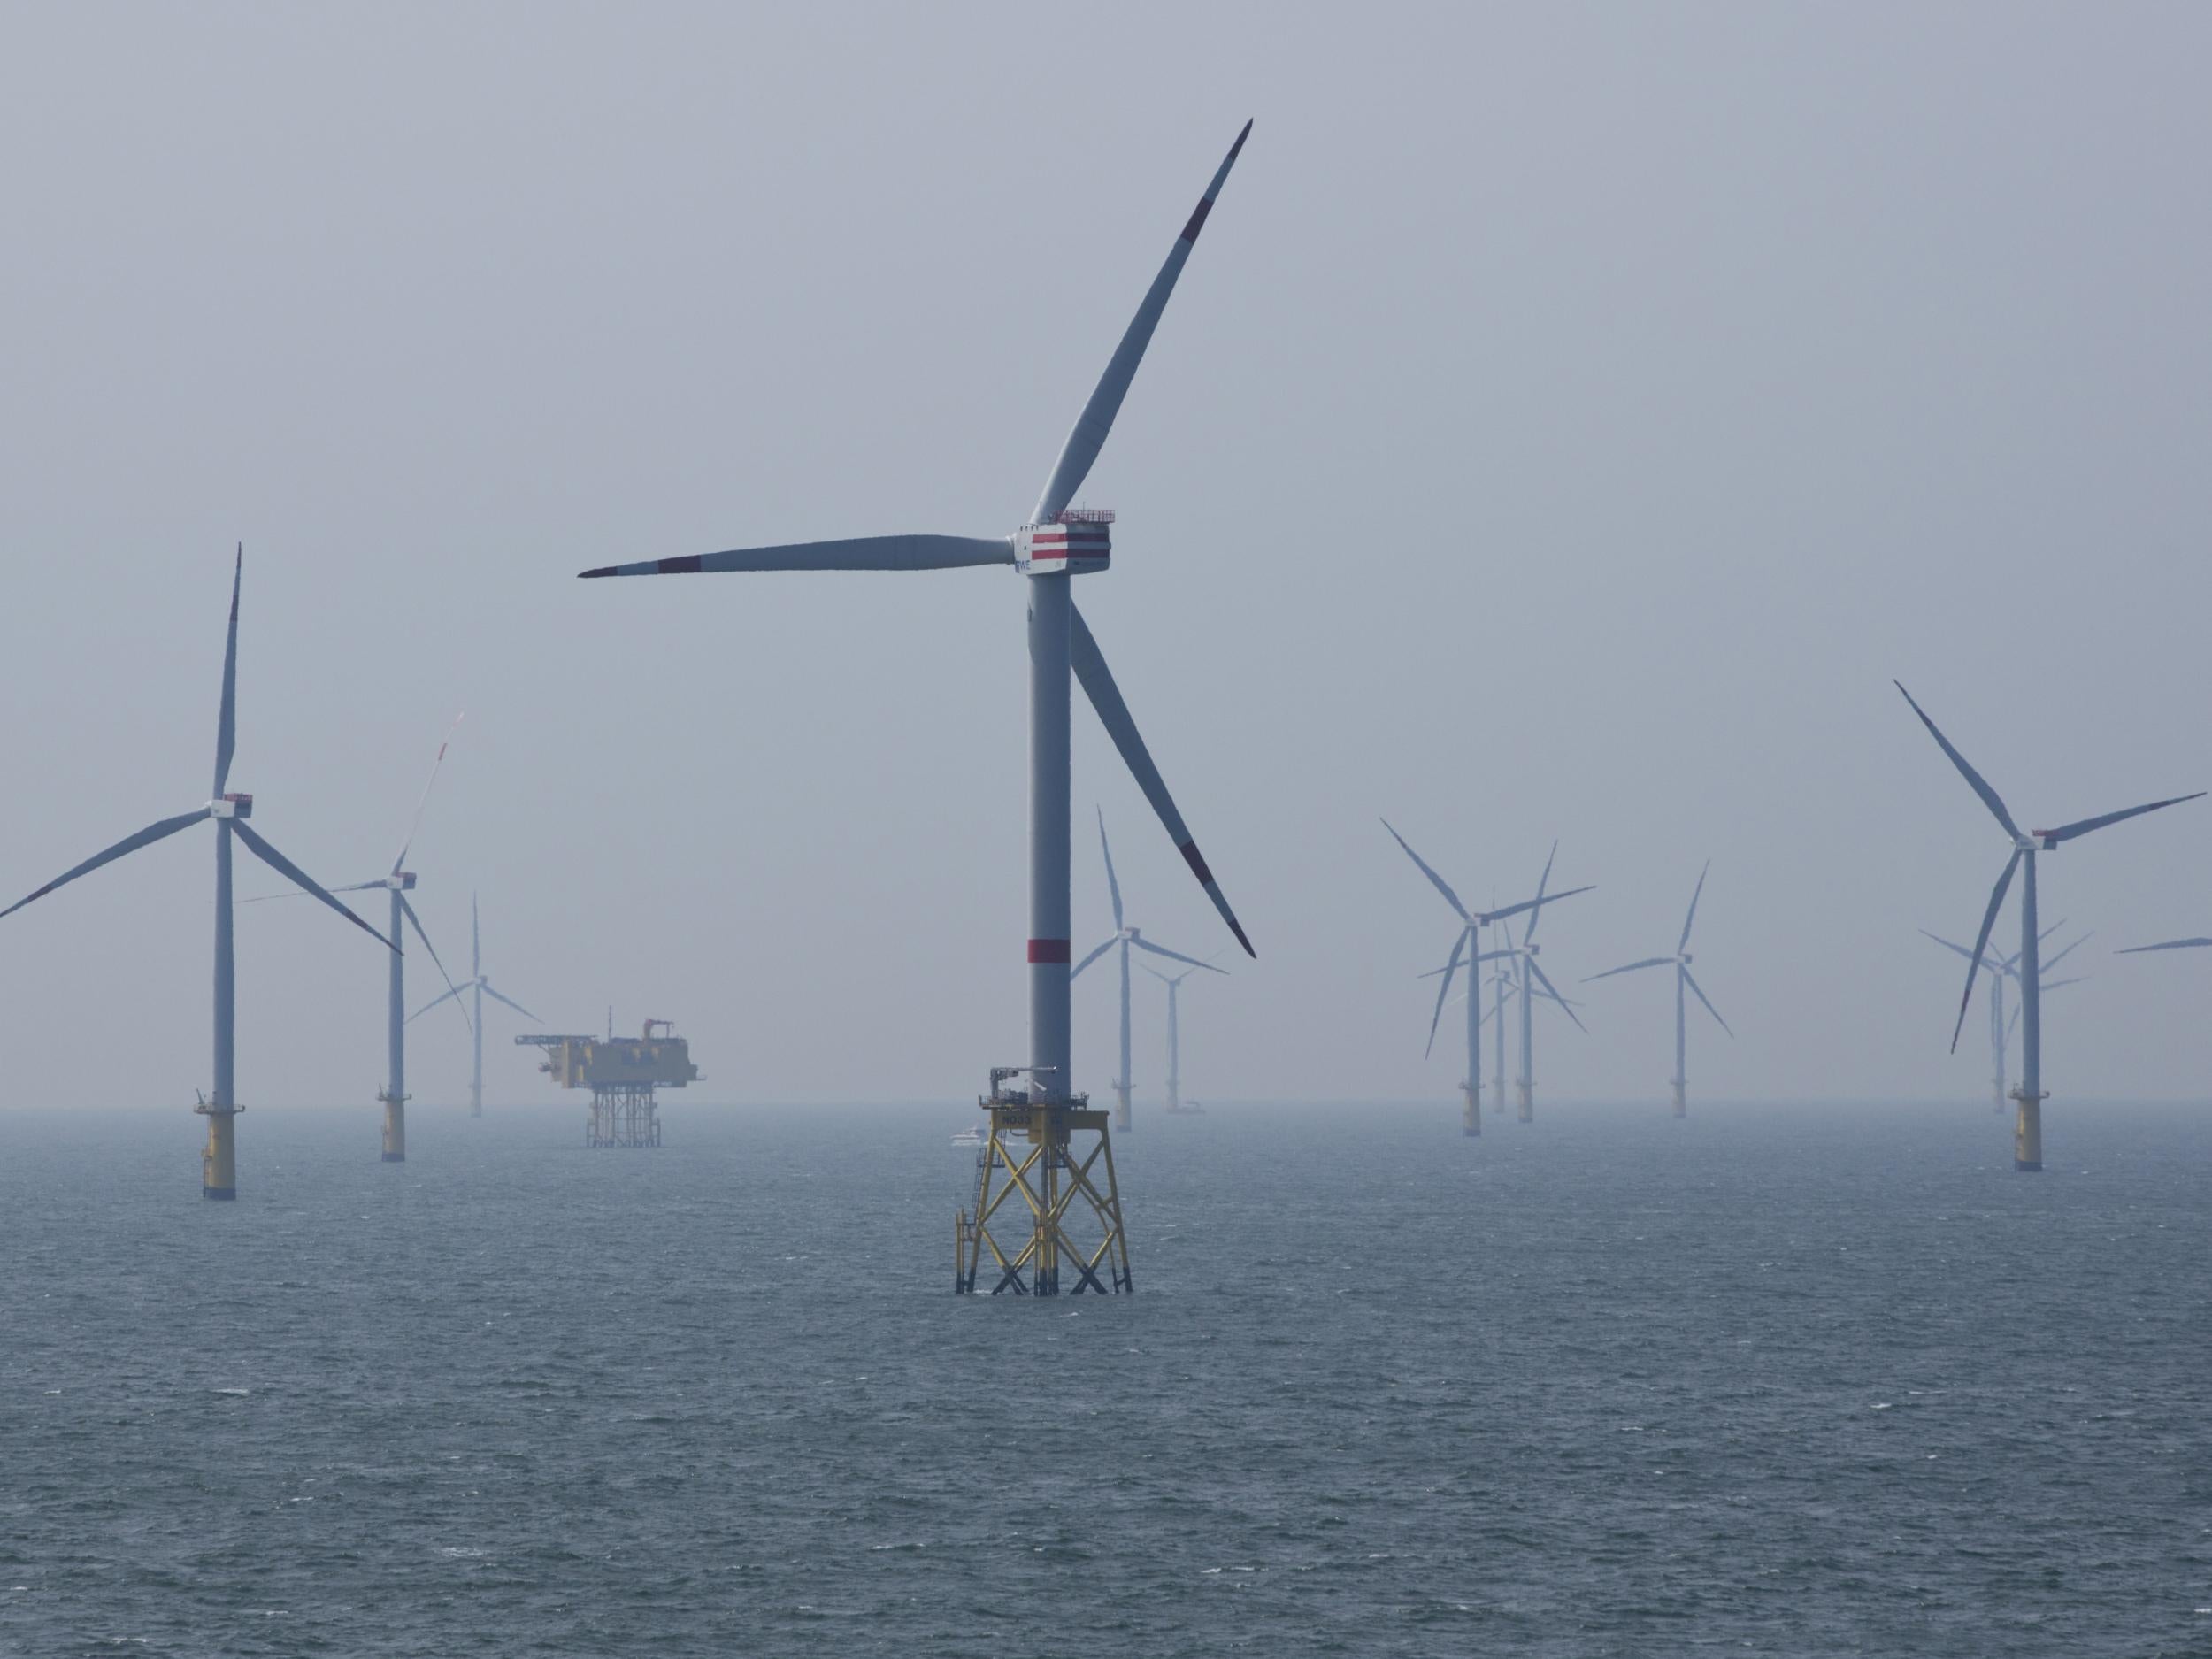 Wind turbines have become increasingly efficient, as longer wind blades have been developed